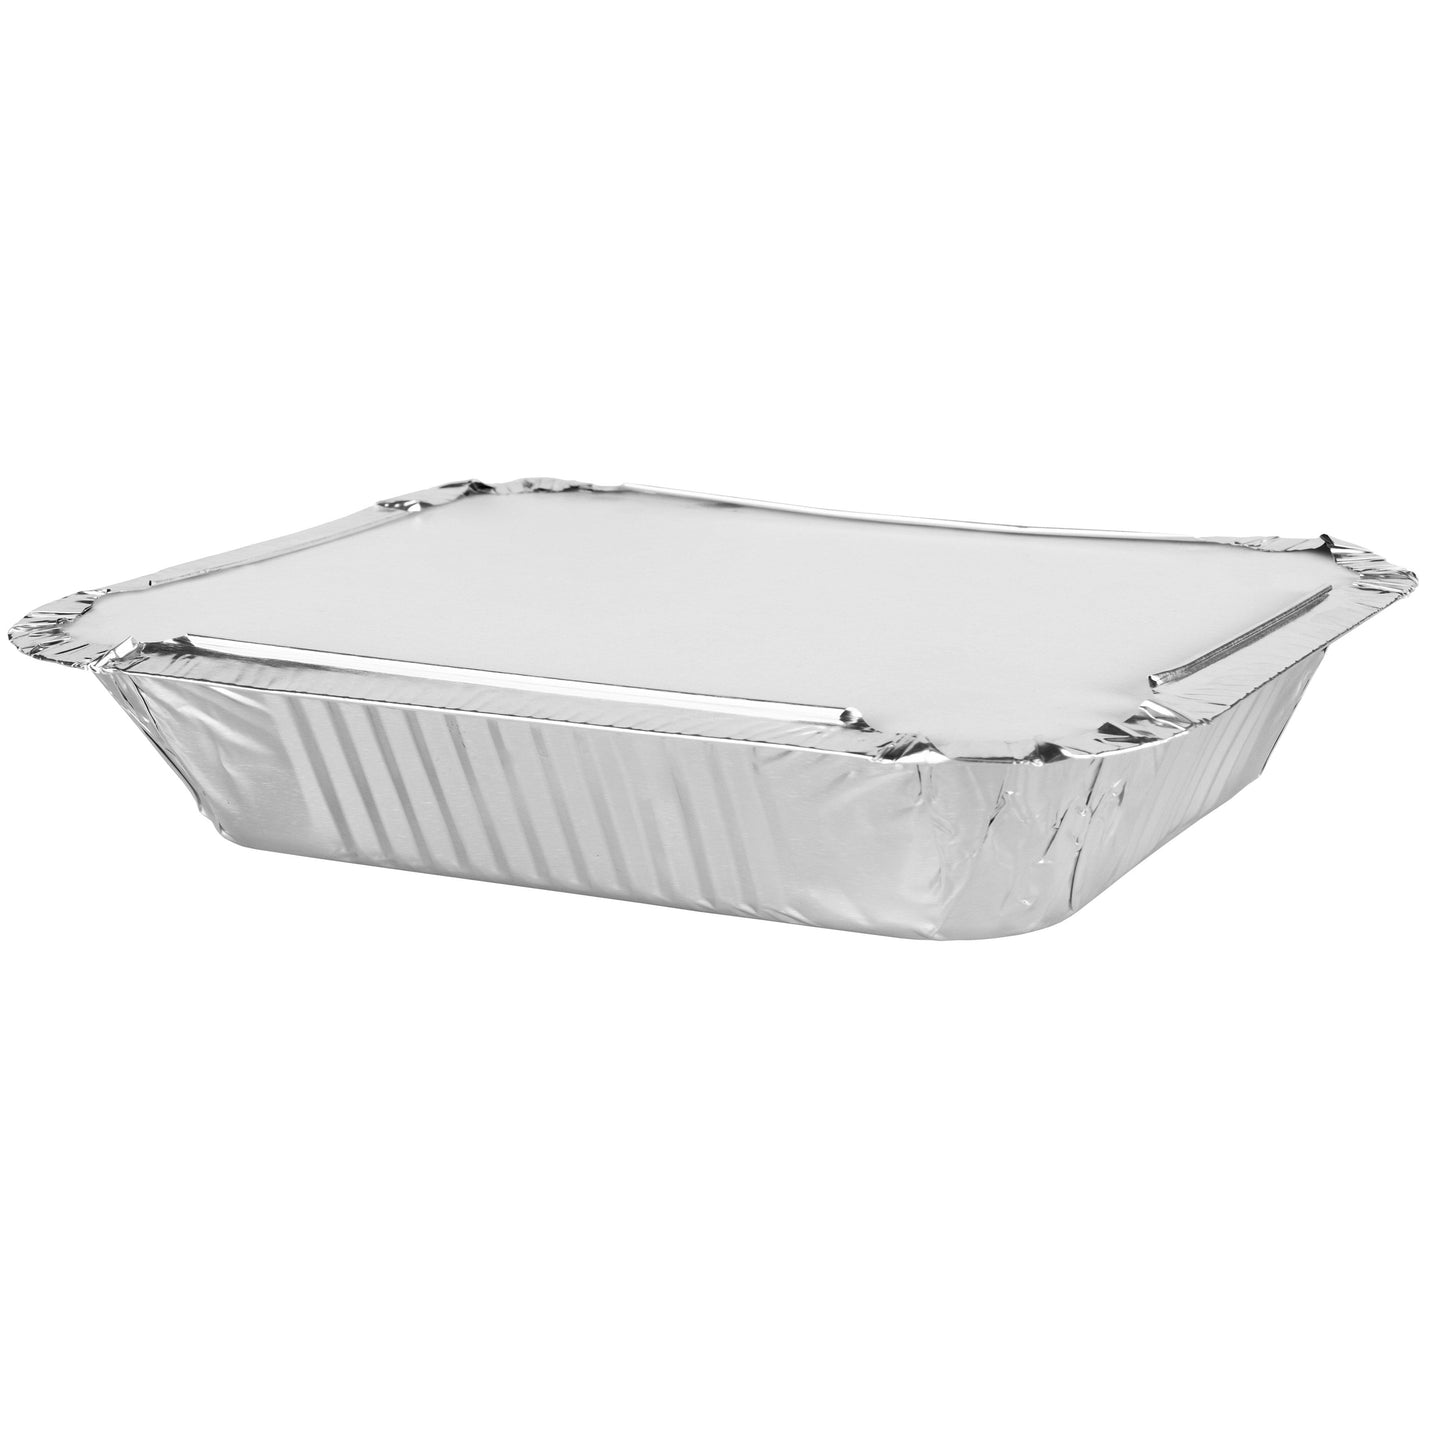 Aluminium Foil Food Roasting Tray with Lids Pack of 2 0866 A (Parcel Rate)